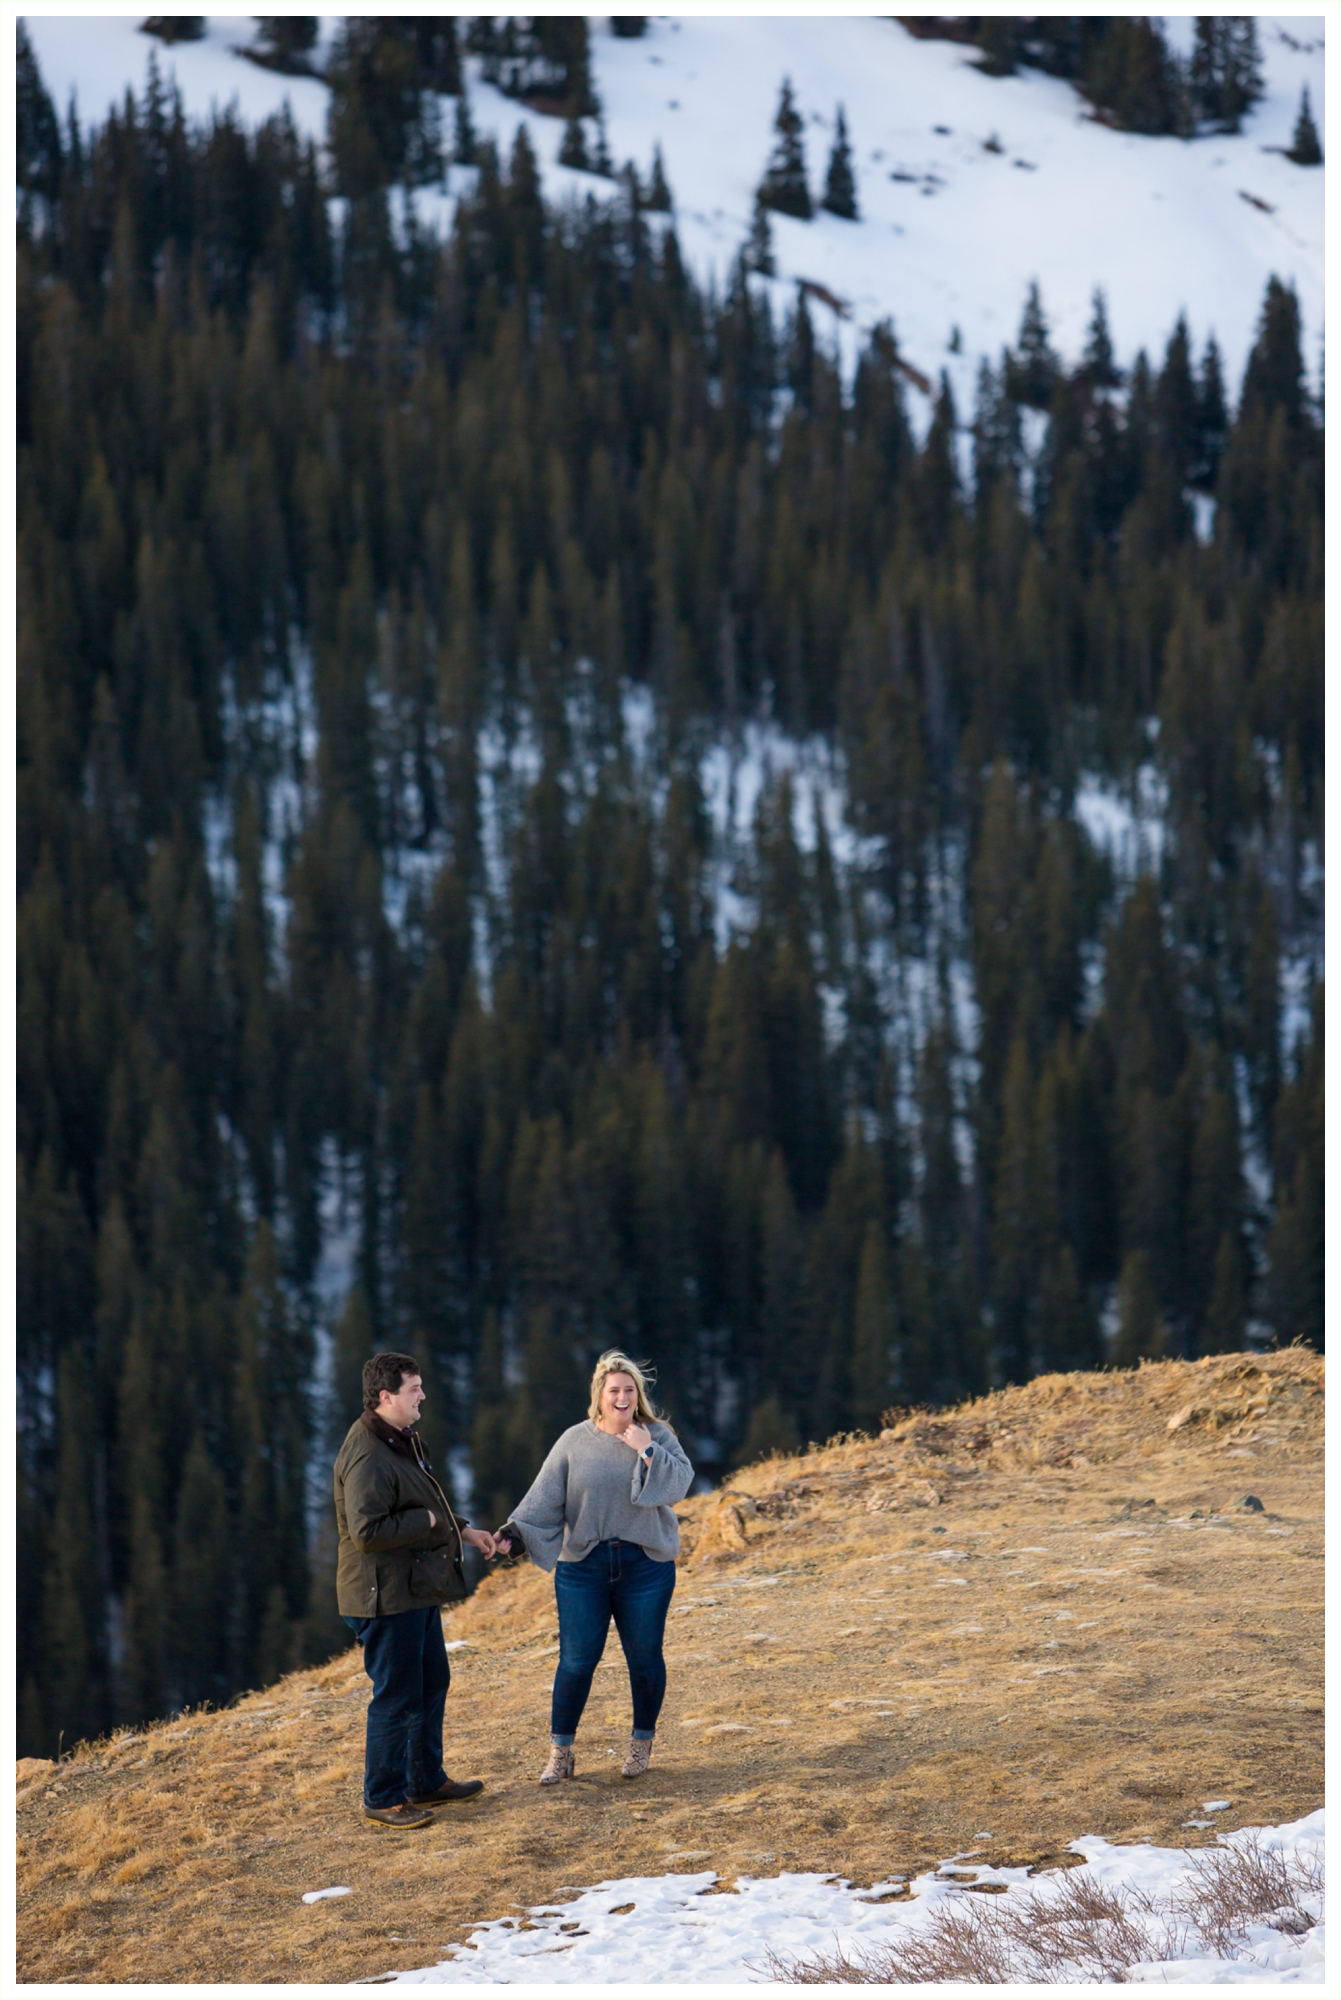 haley is shocked after austin proposes at loveland pass in colorado winter